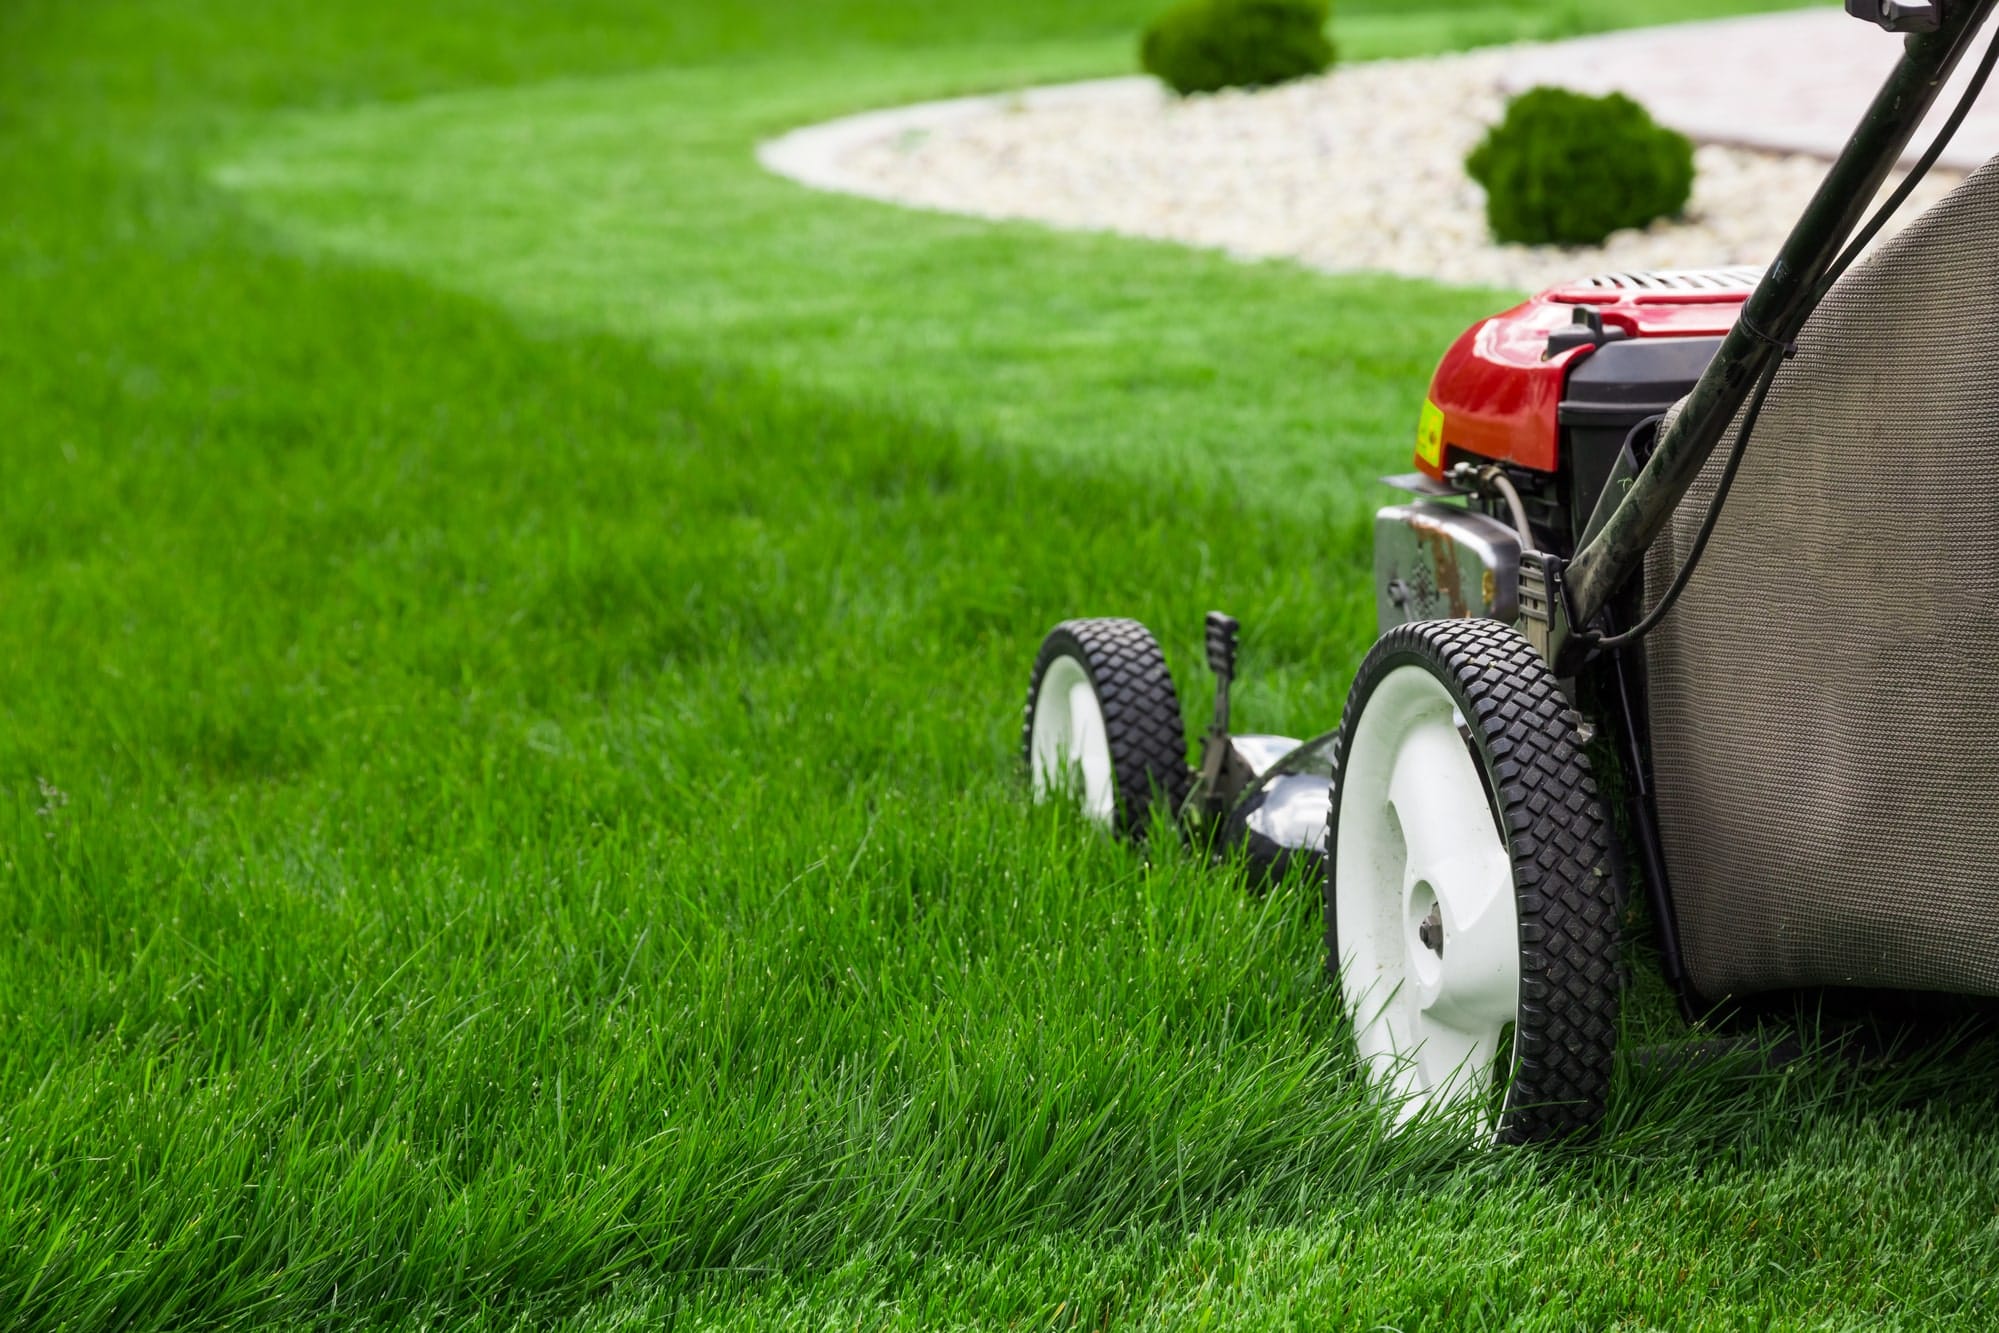 advance or basic lawn mowing services from lawn care companies